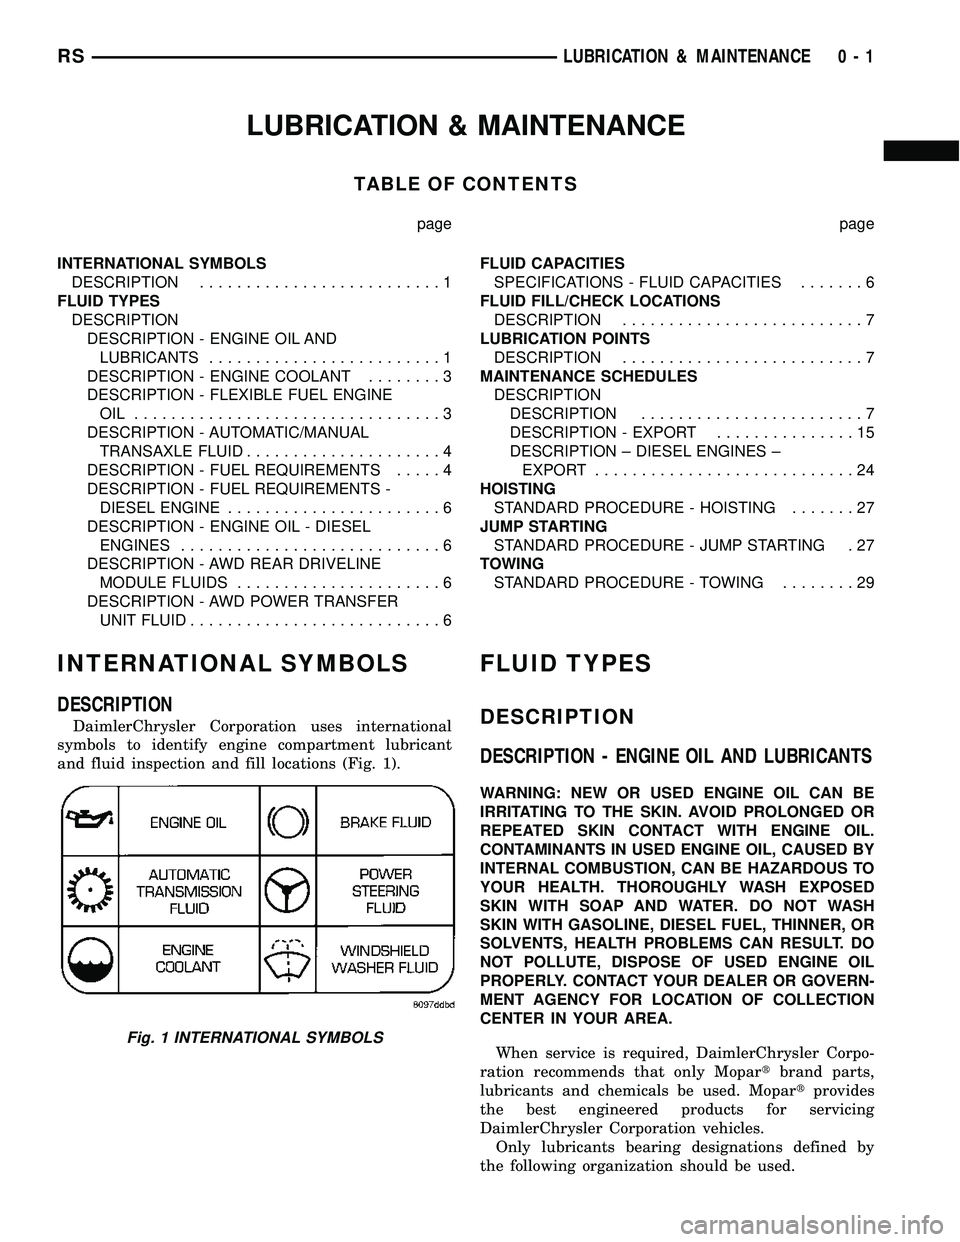 DODGE TOWN AND COUNTRY 2004 User Guide LUBRICATION & MAINTENANCE
TABLE OF CONTENTS
page page
INTERNATIONAL SYMBOLS
DESCRIPTION..........................1
FLUID TYPES
DESCRIPTION
DESCRIPTION - ENGINE OIL AND
LUBRICANTS......................